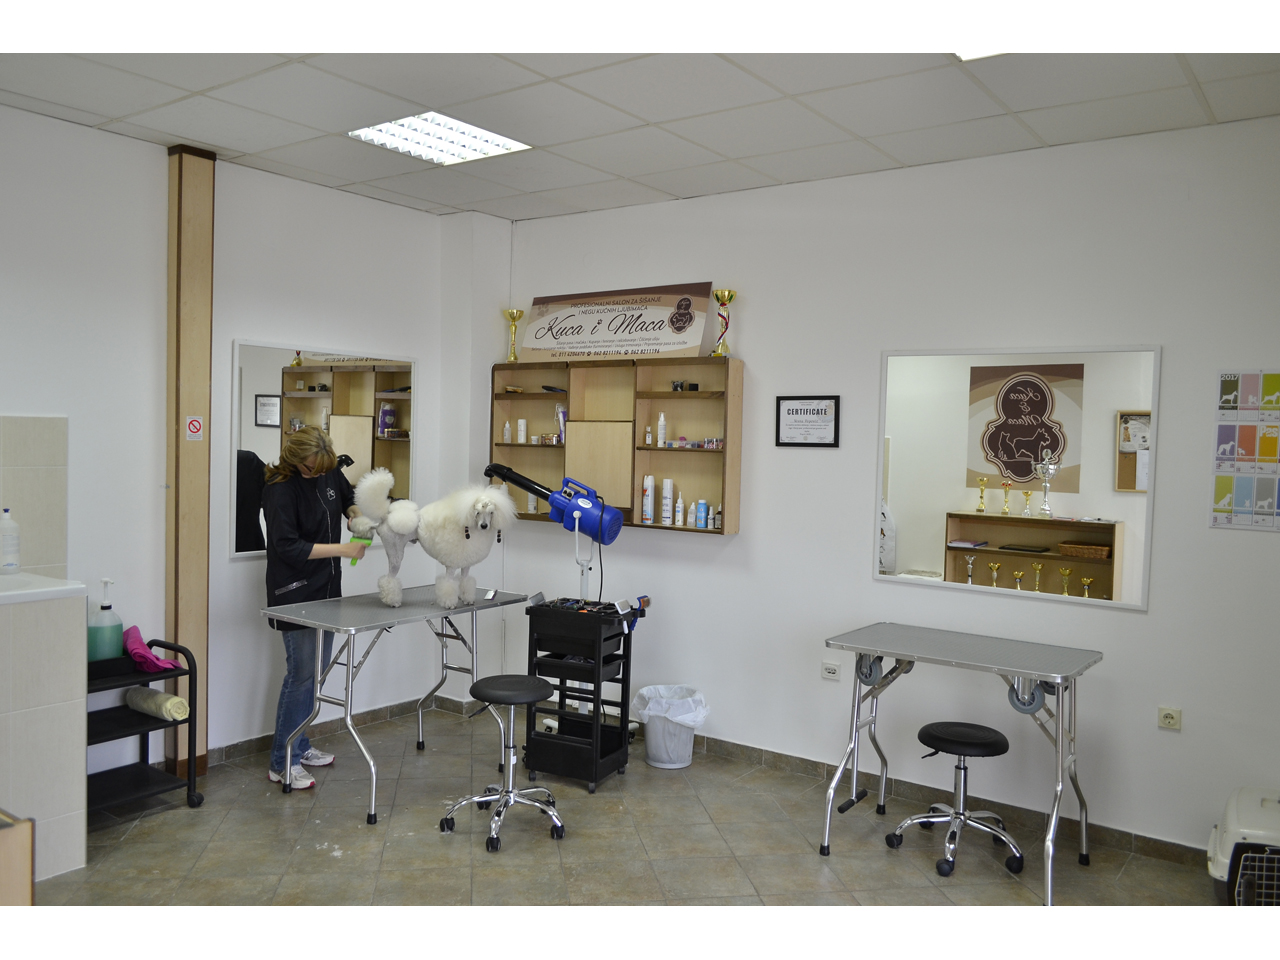 01 KUCA I MACA GROOMING SALON FOR DOGS AND CATS AND EDUCATION Pet salon, dog grooming Beograd